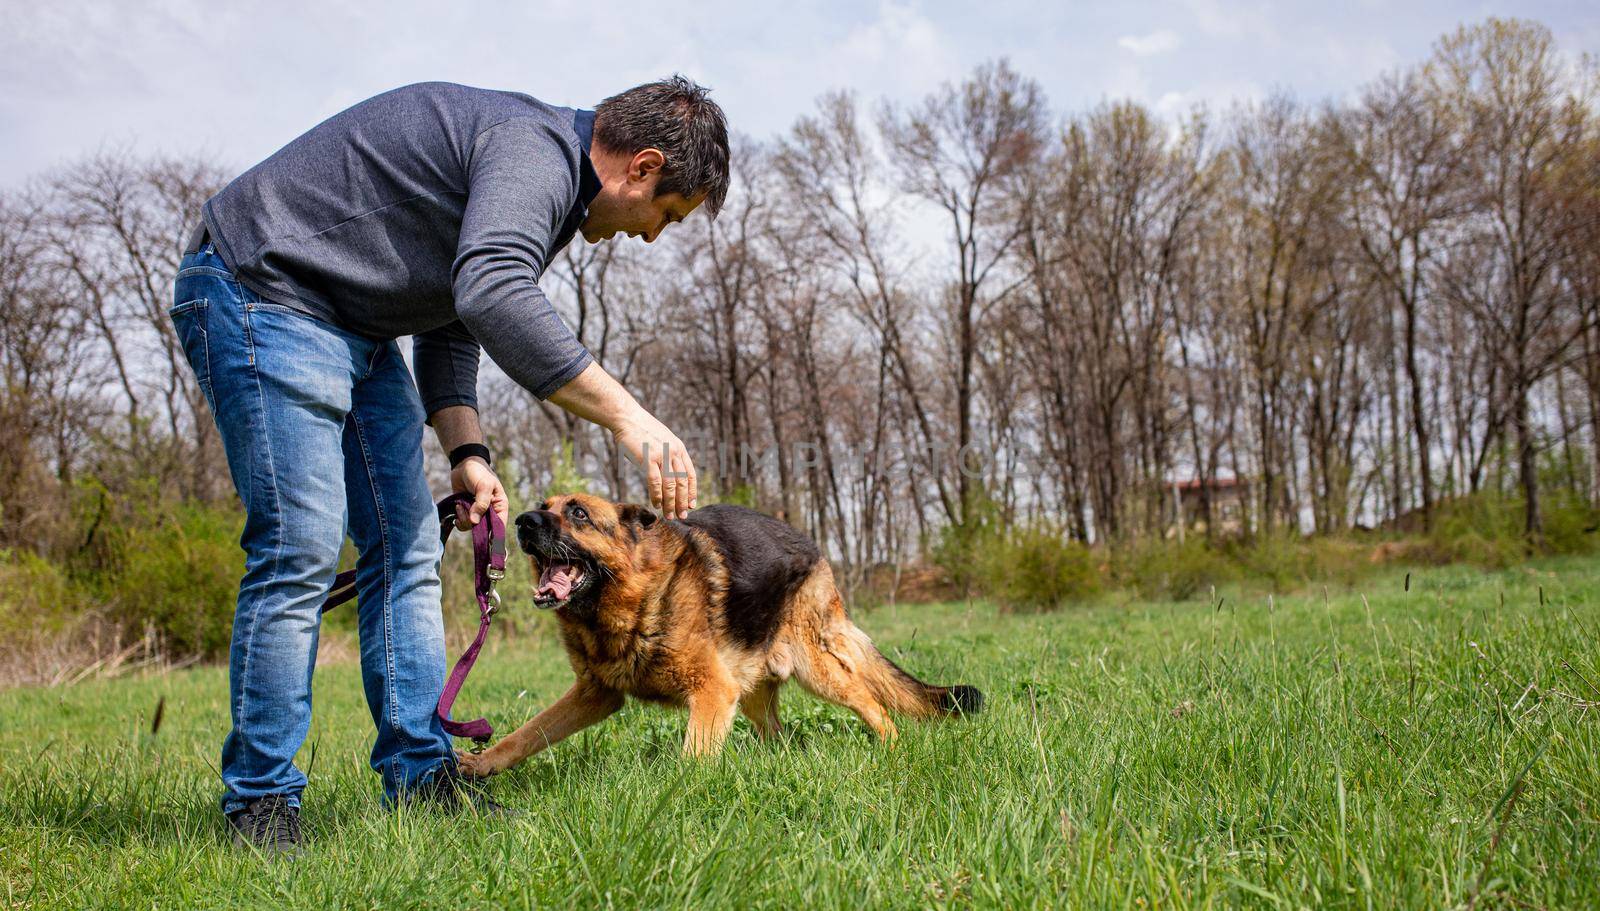 A men is playing with his dog - a German Shepherd on a green grass lawn in spring time.